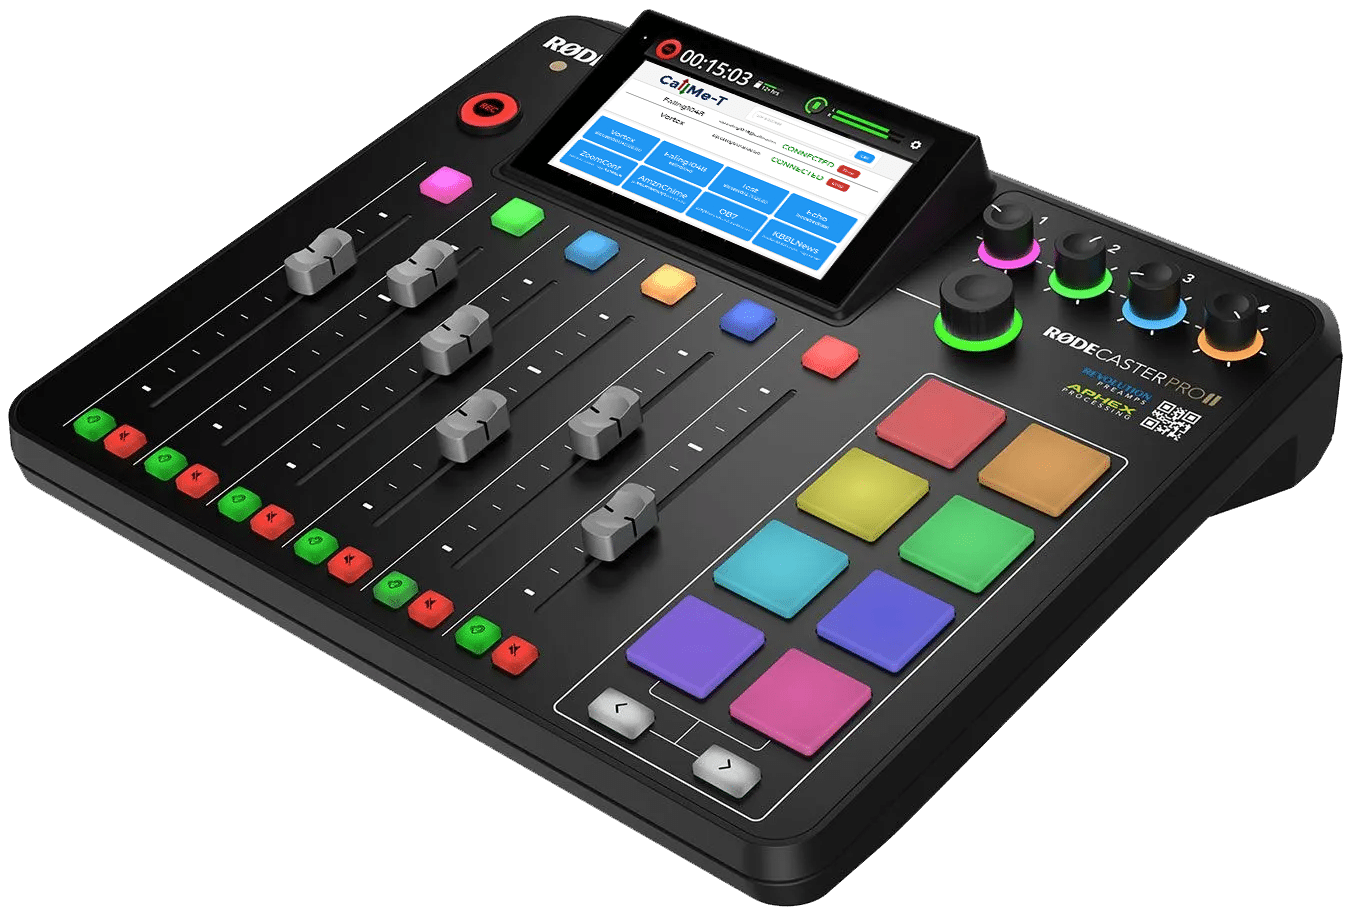 Test: Rode RODECaster Pro II, All-in-one-Recording/Podcast-Station , rodecaster  pro 2 